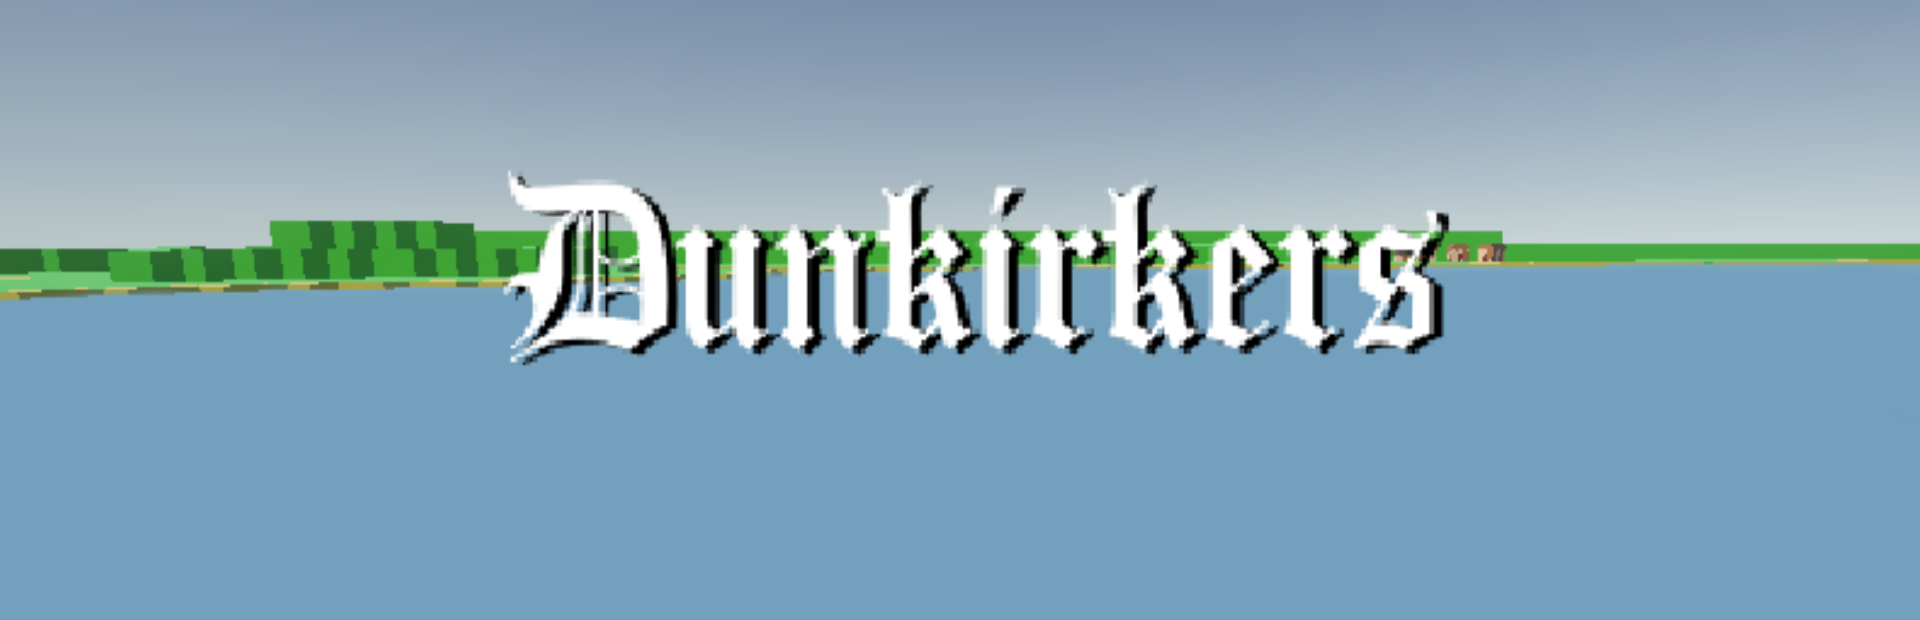 Dunkirkers